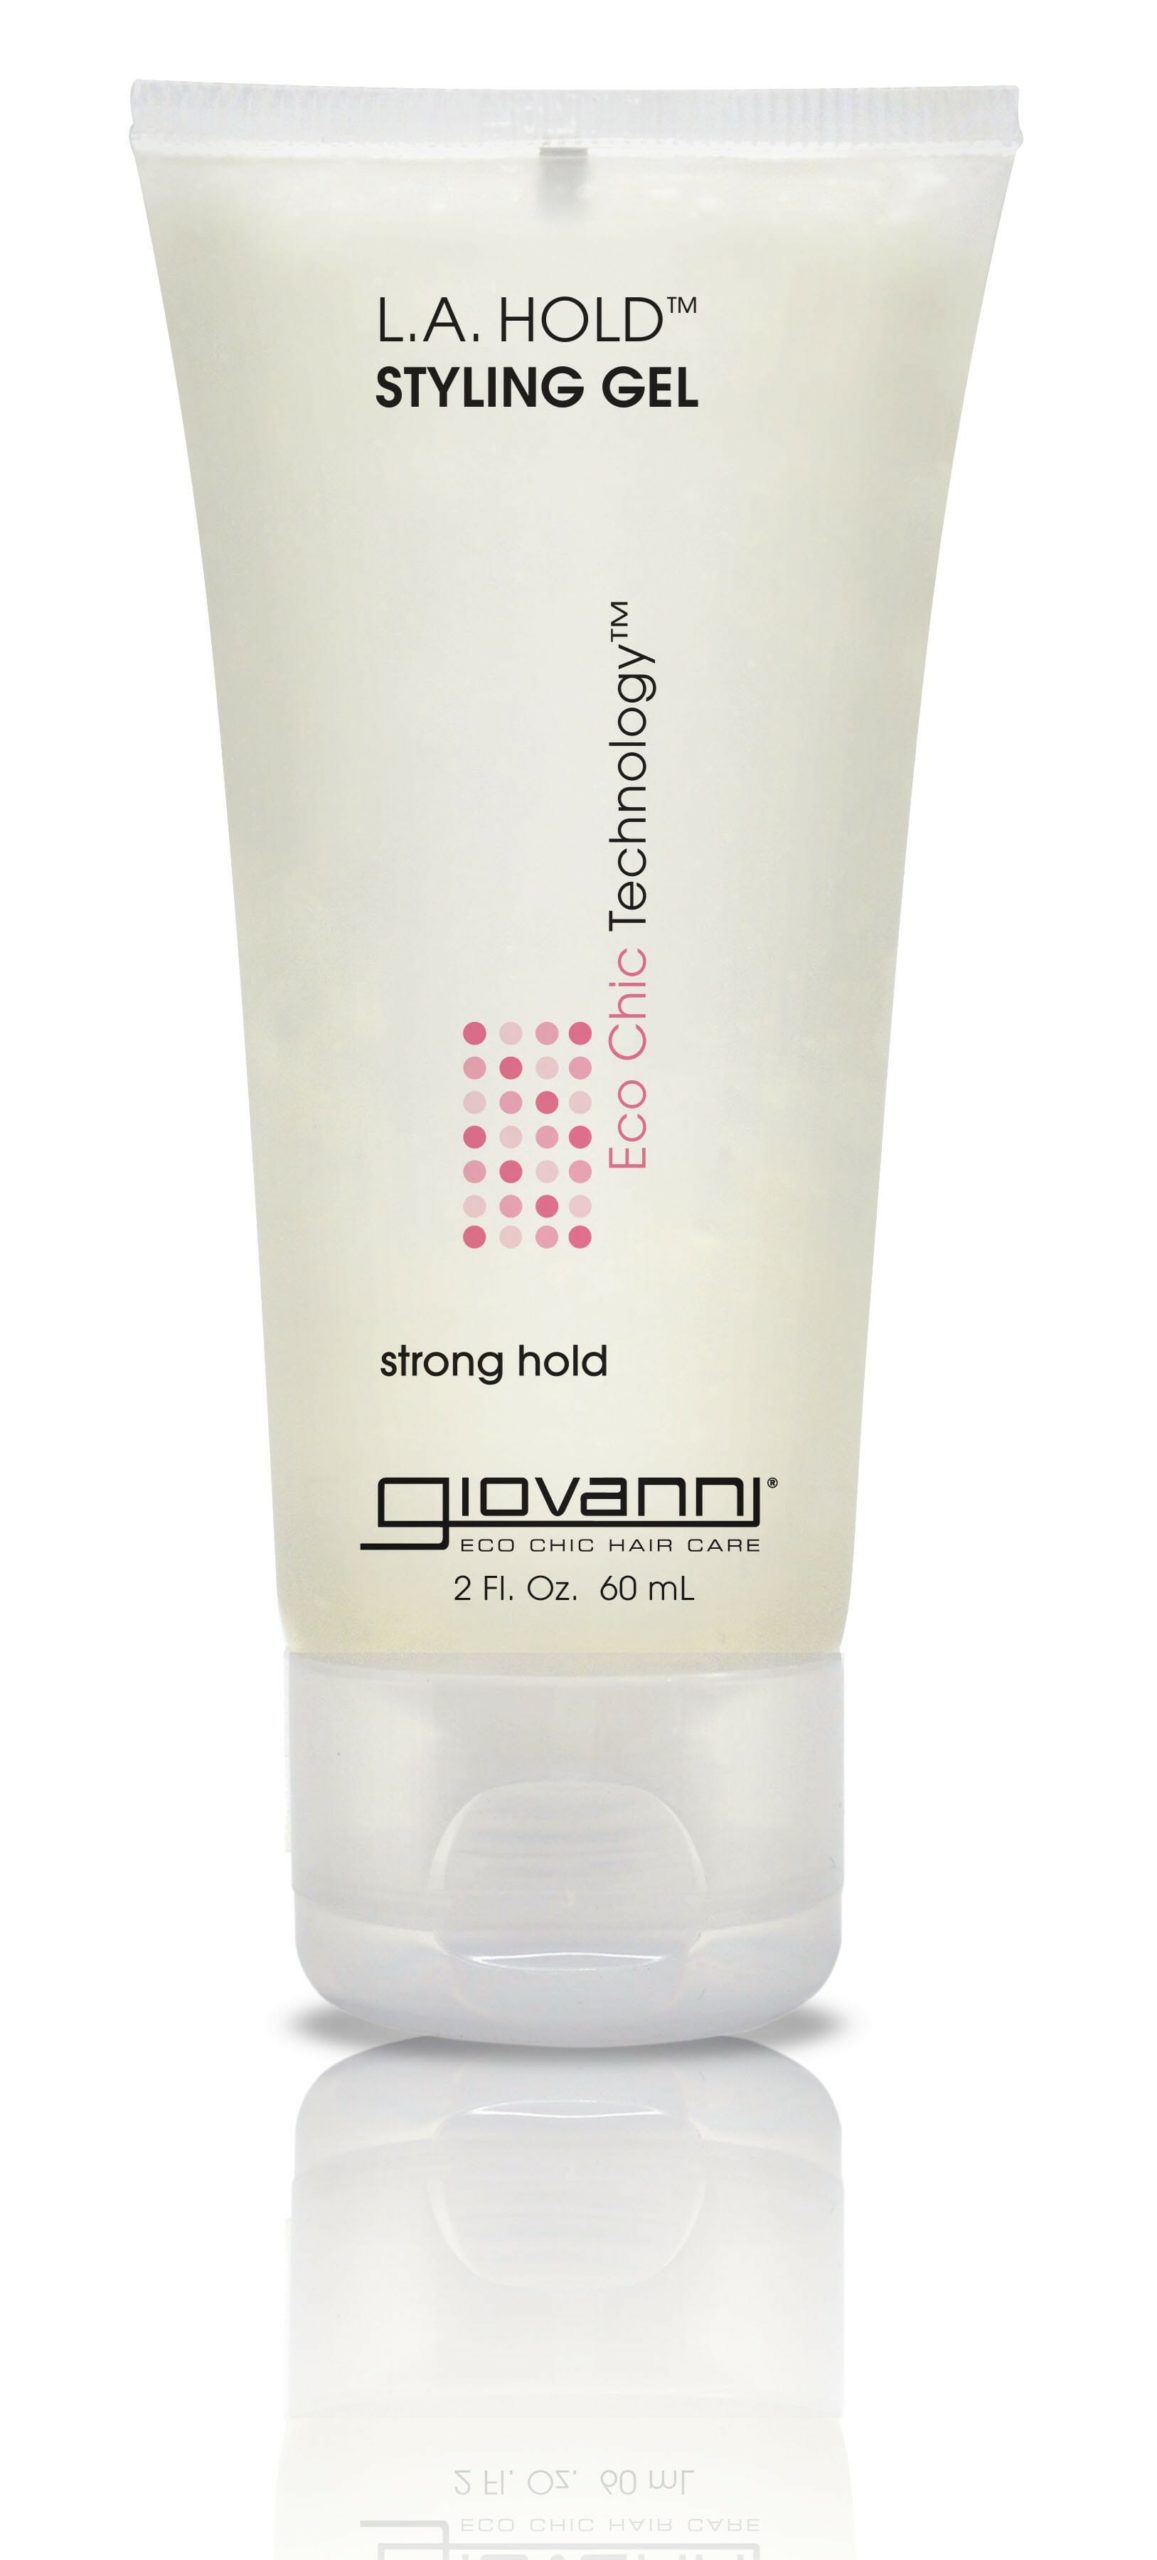 Giovanni LA Natural Styling Gel 60ml – Healthy Options